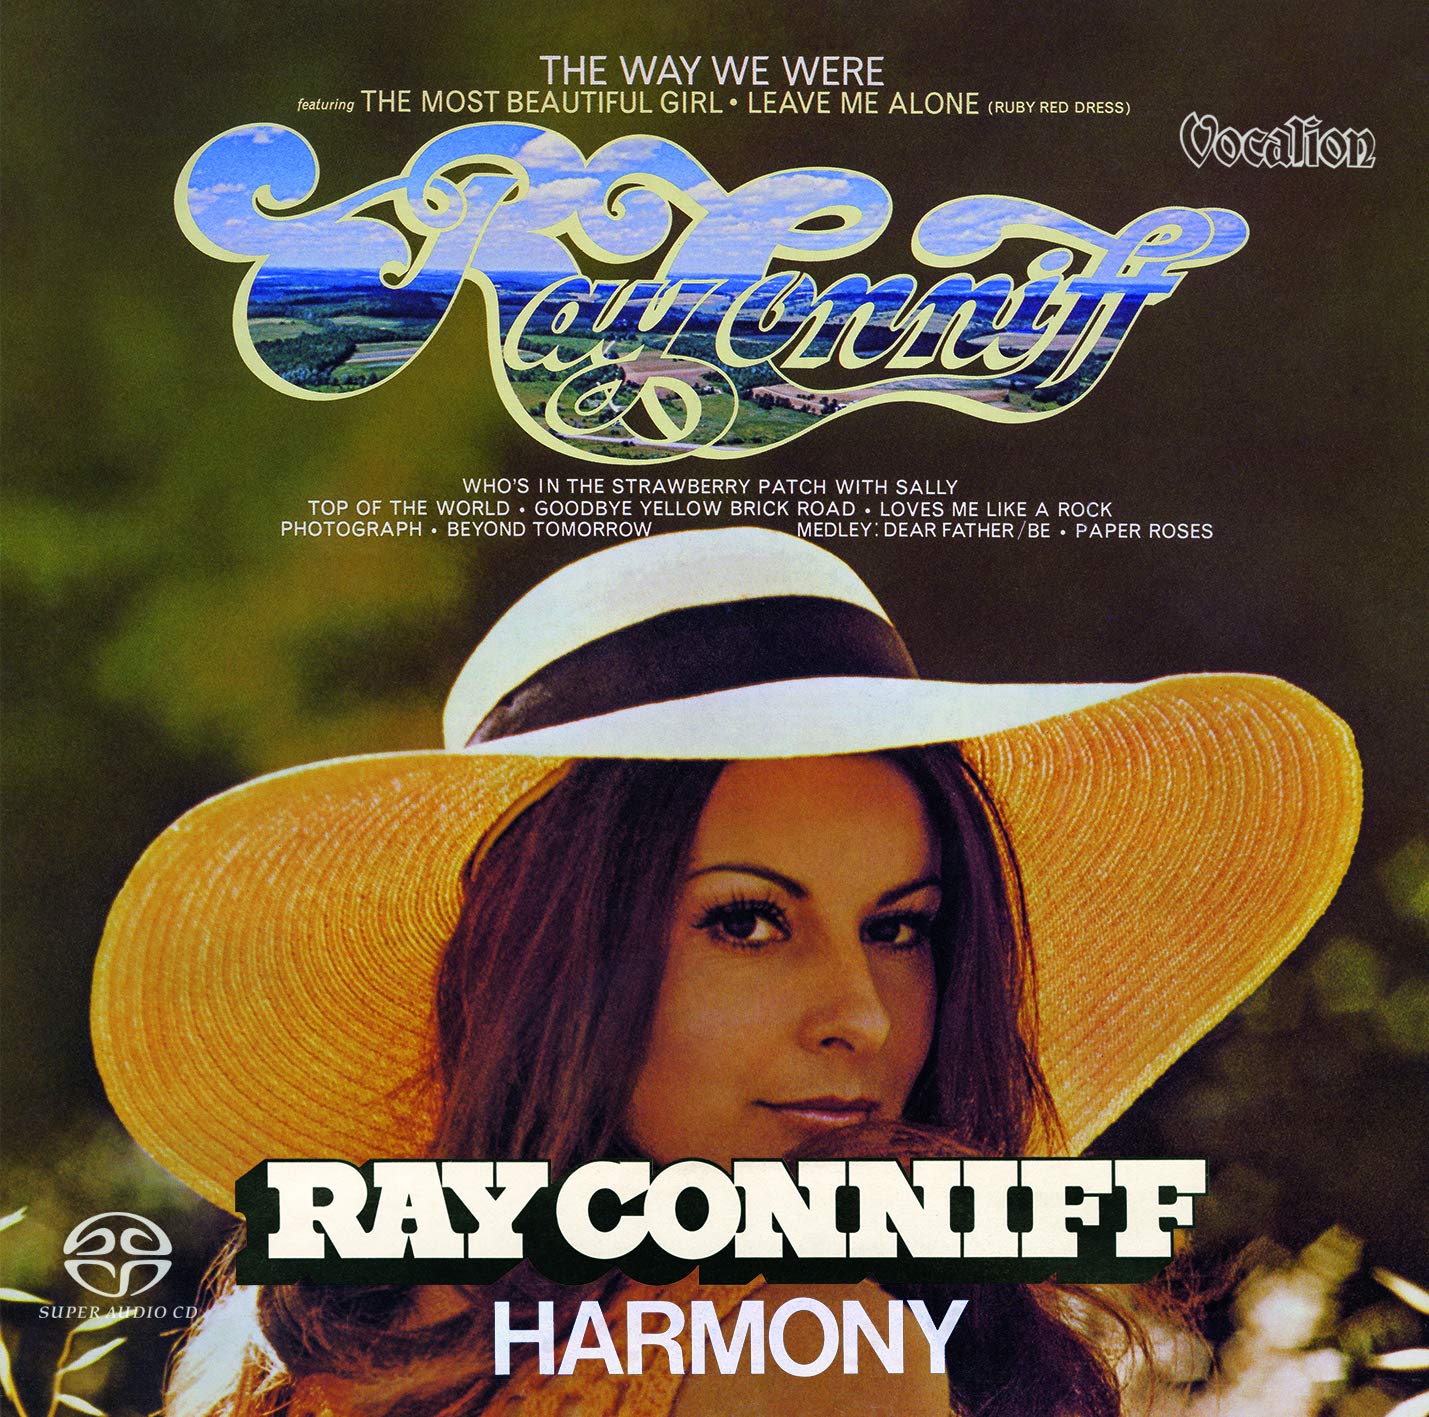 Ray Conniff – Harmony & The Way We Were (1973 & 1974) [Reissue 2019] MCH SACD ISO + Hi-Res FLAC